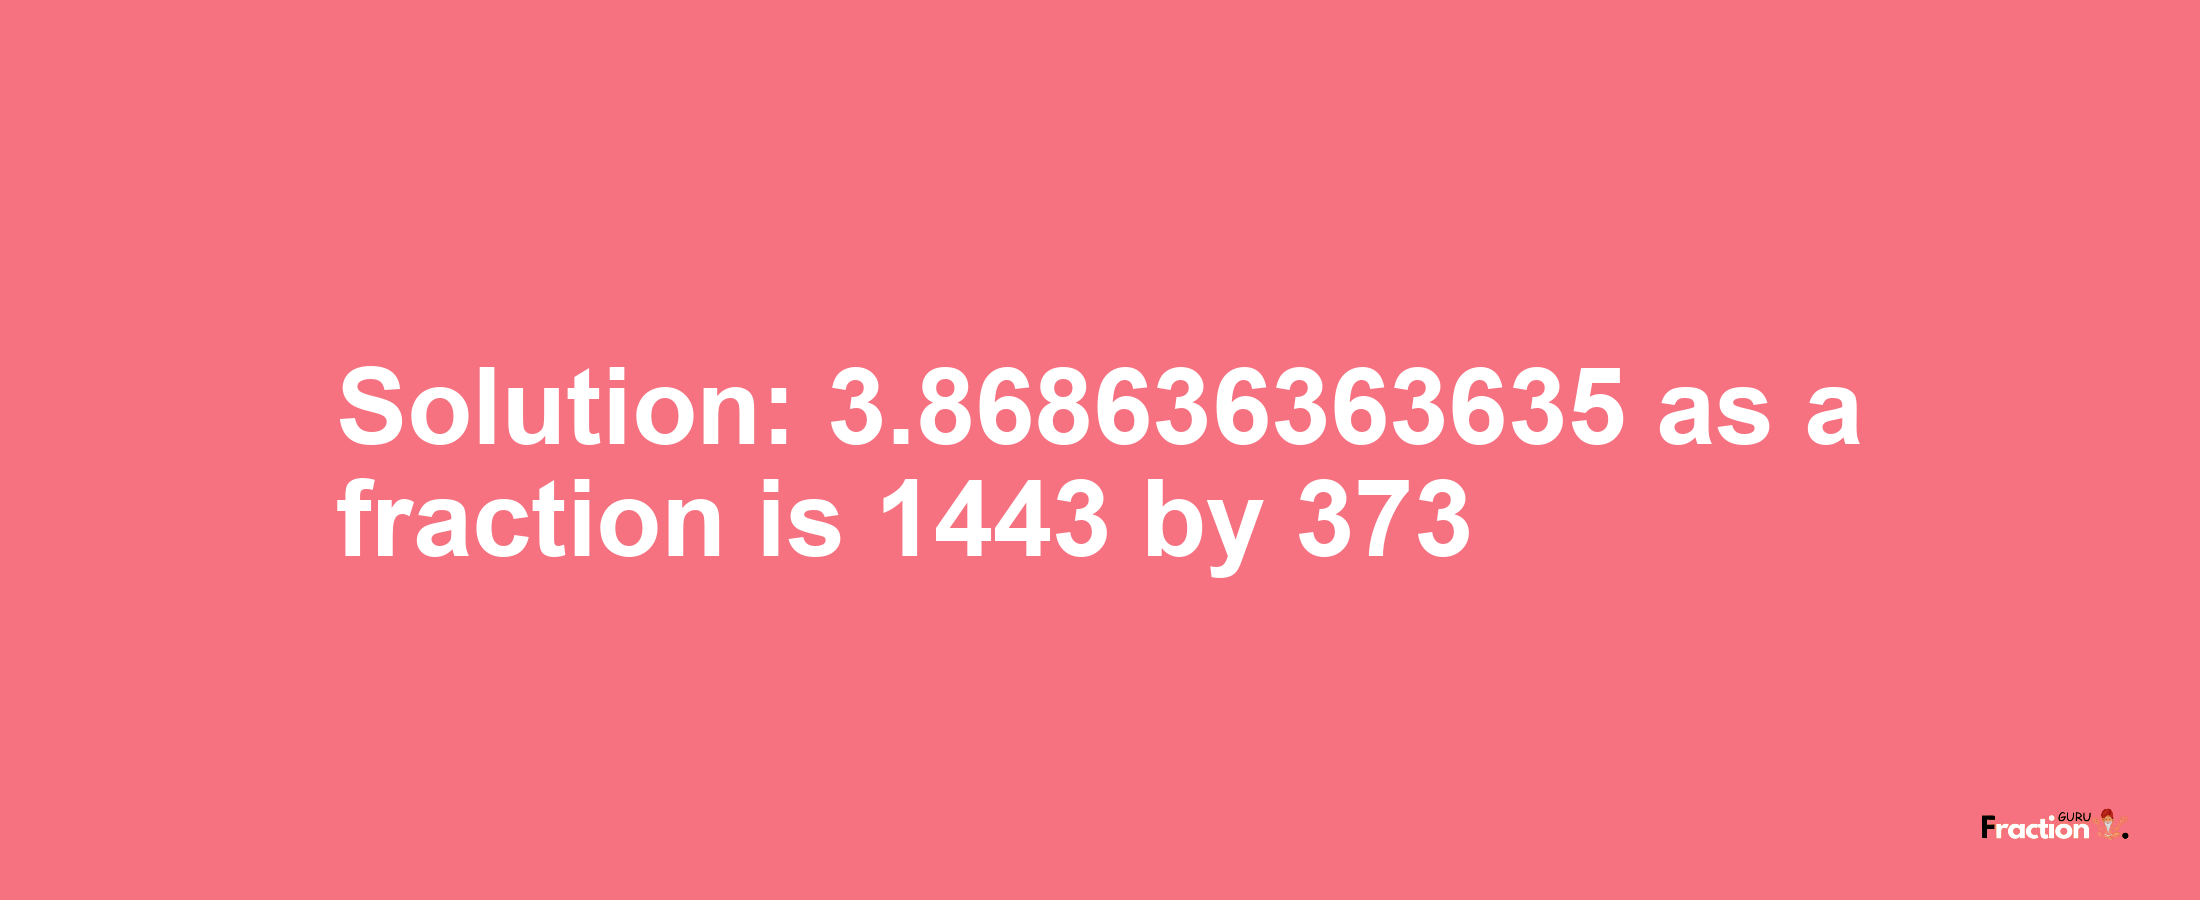 Solution:3.868636363635 as a fraction is 1443/373